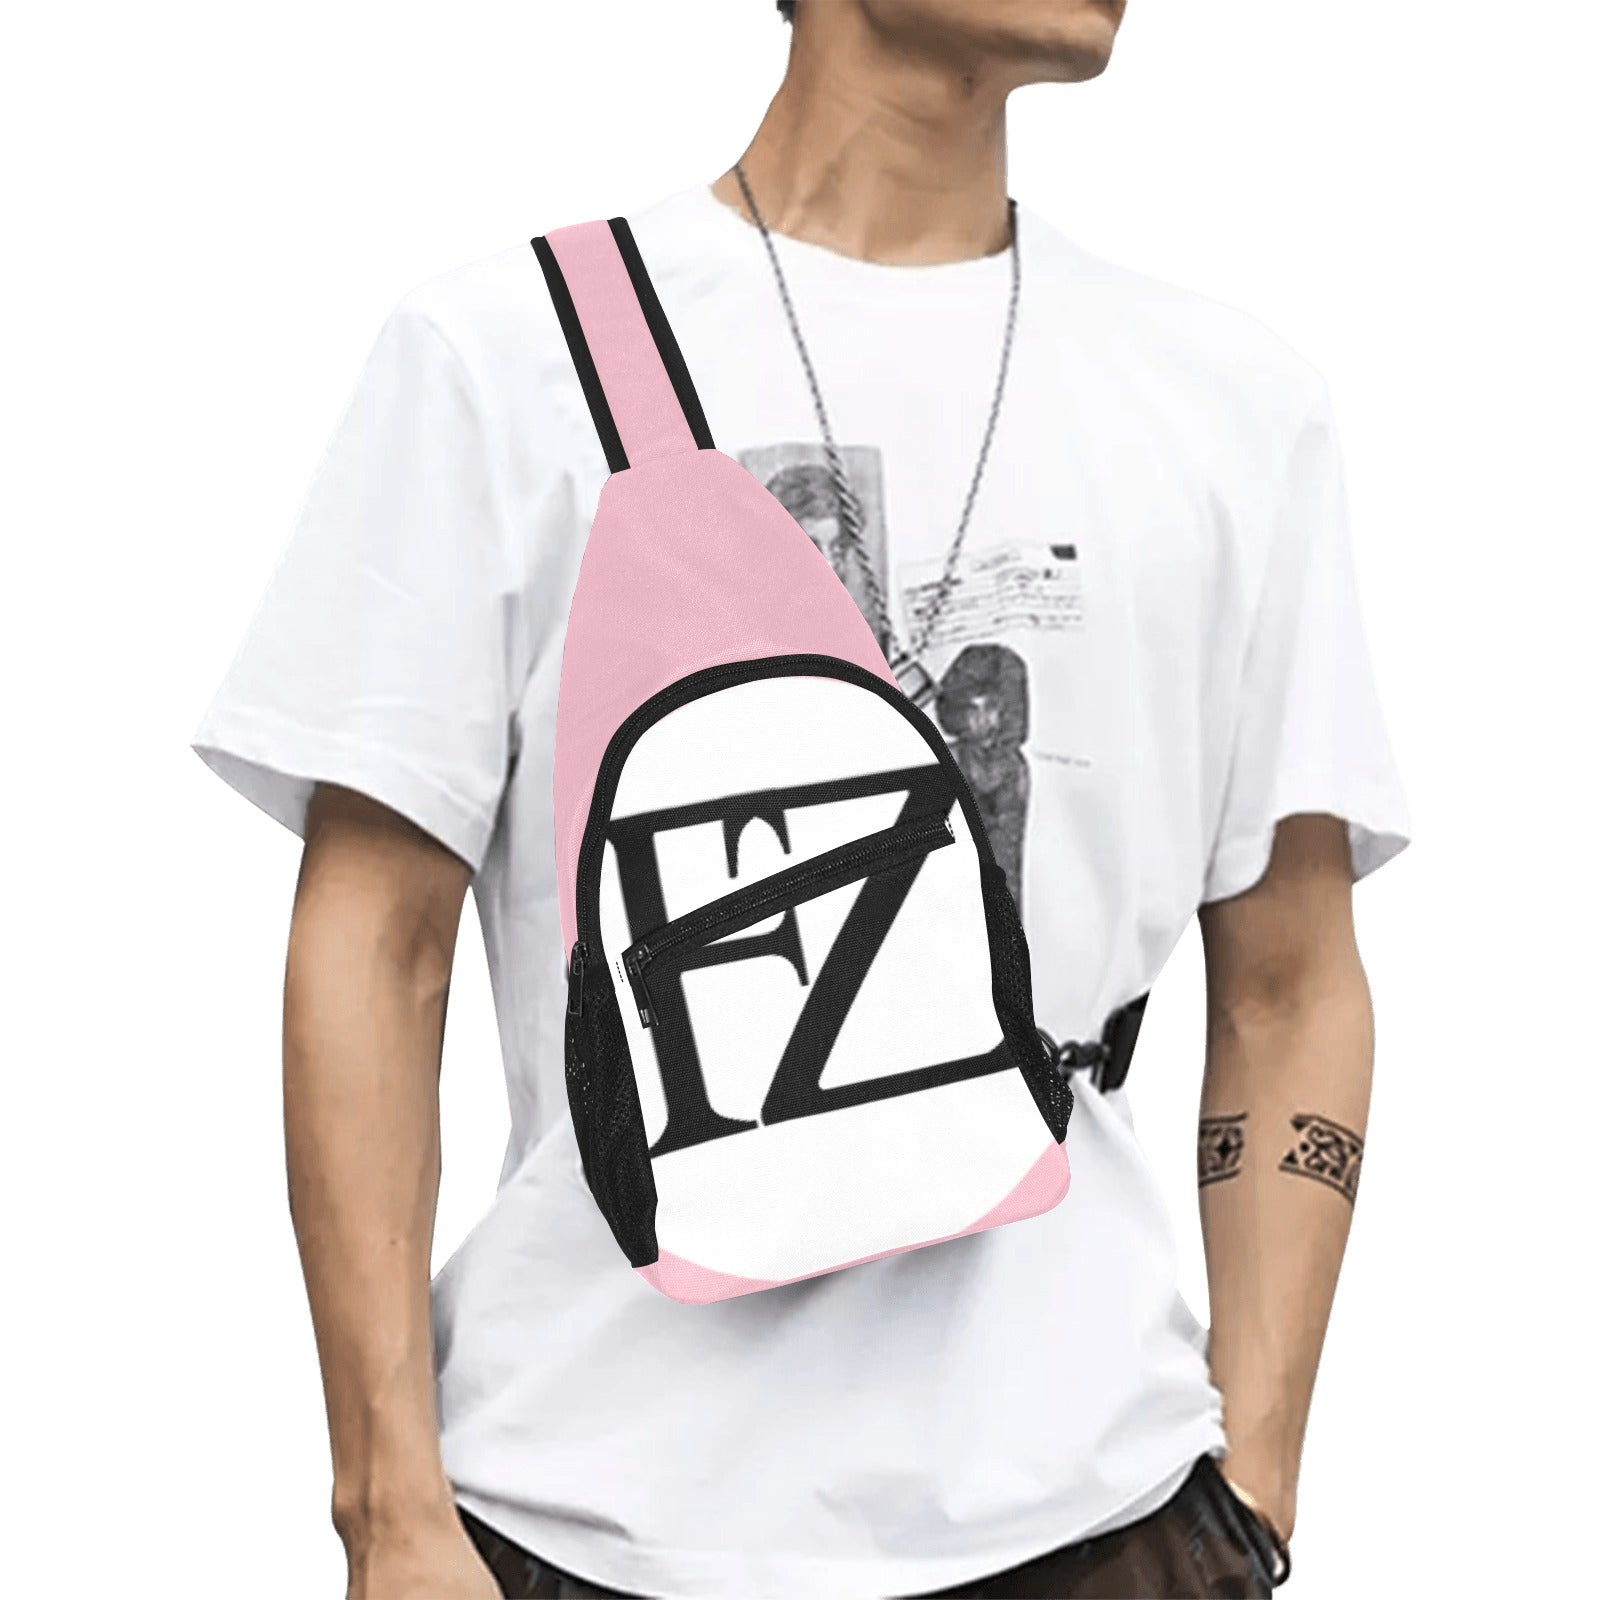 fz men's chest bag too one size / fz men's chest bag too-pink all over print chest bag(model1719)